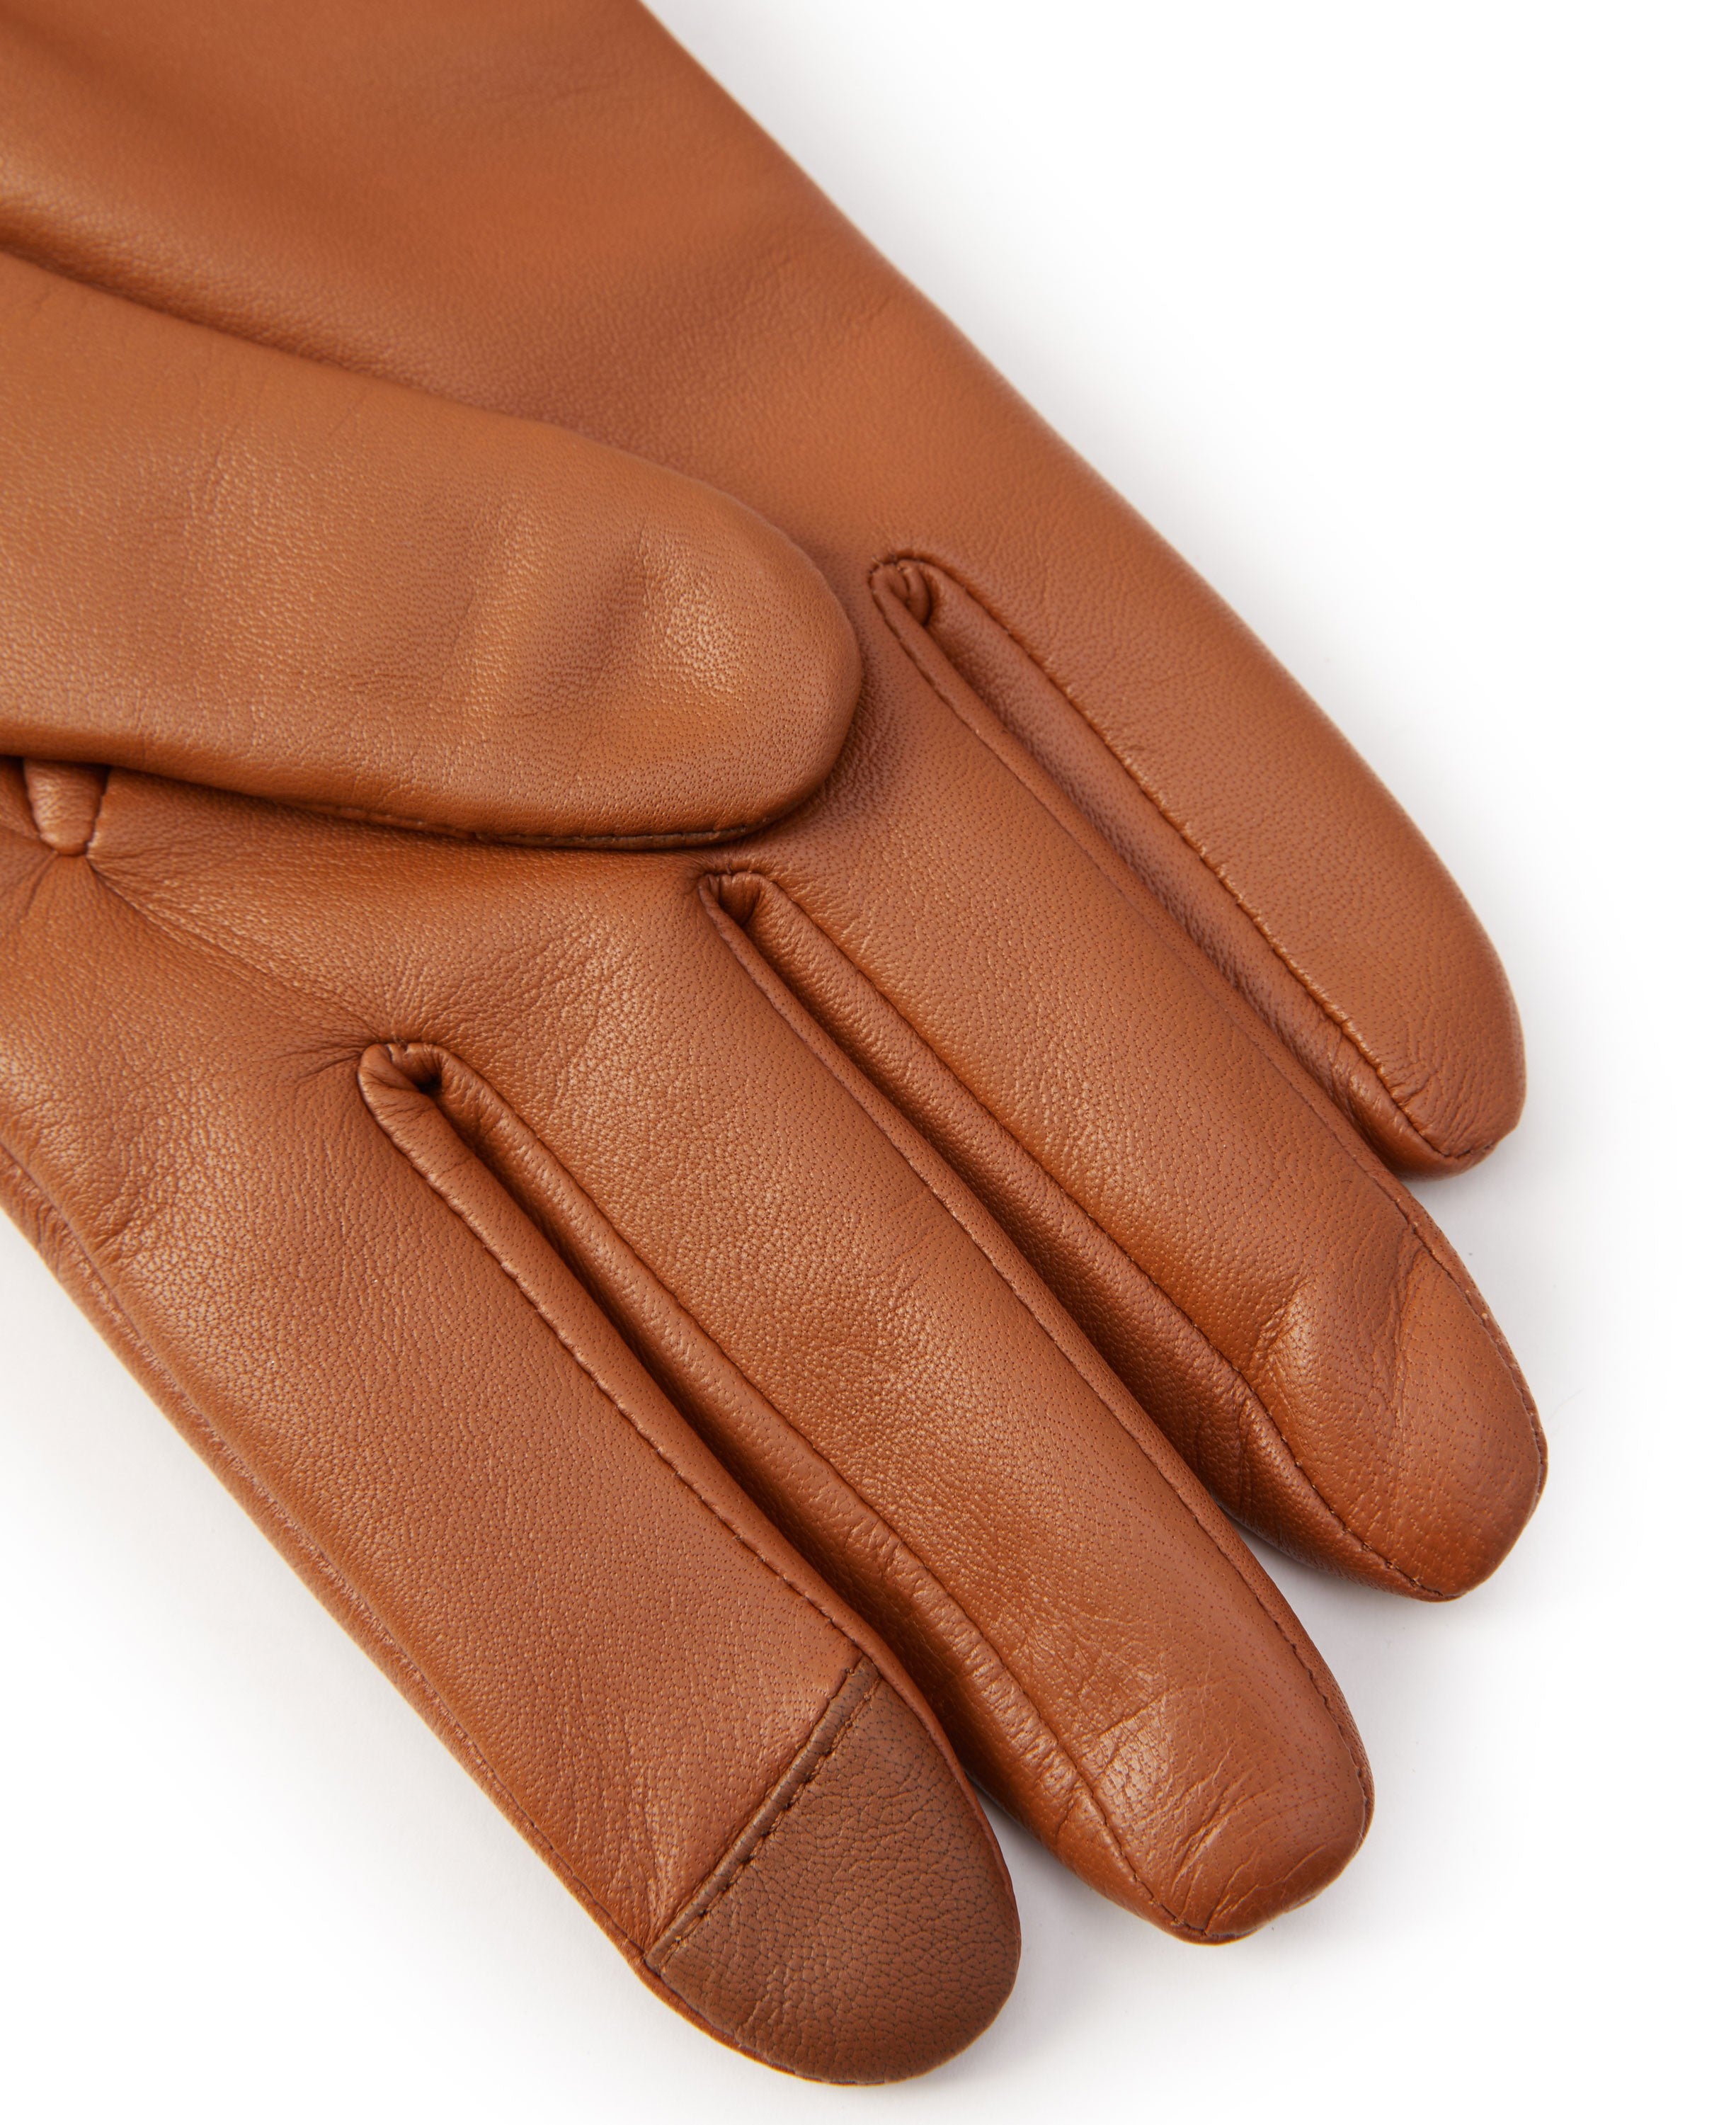 Contrast Leather Gloves - Tan/Ink Navy